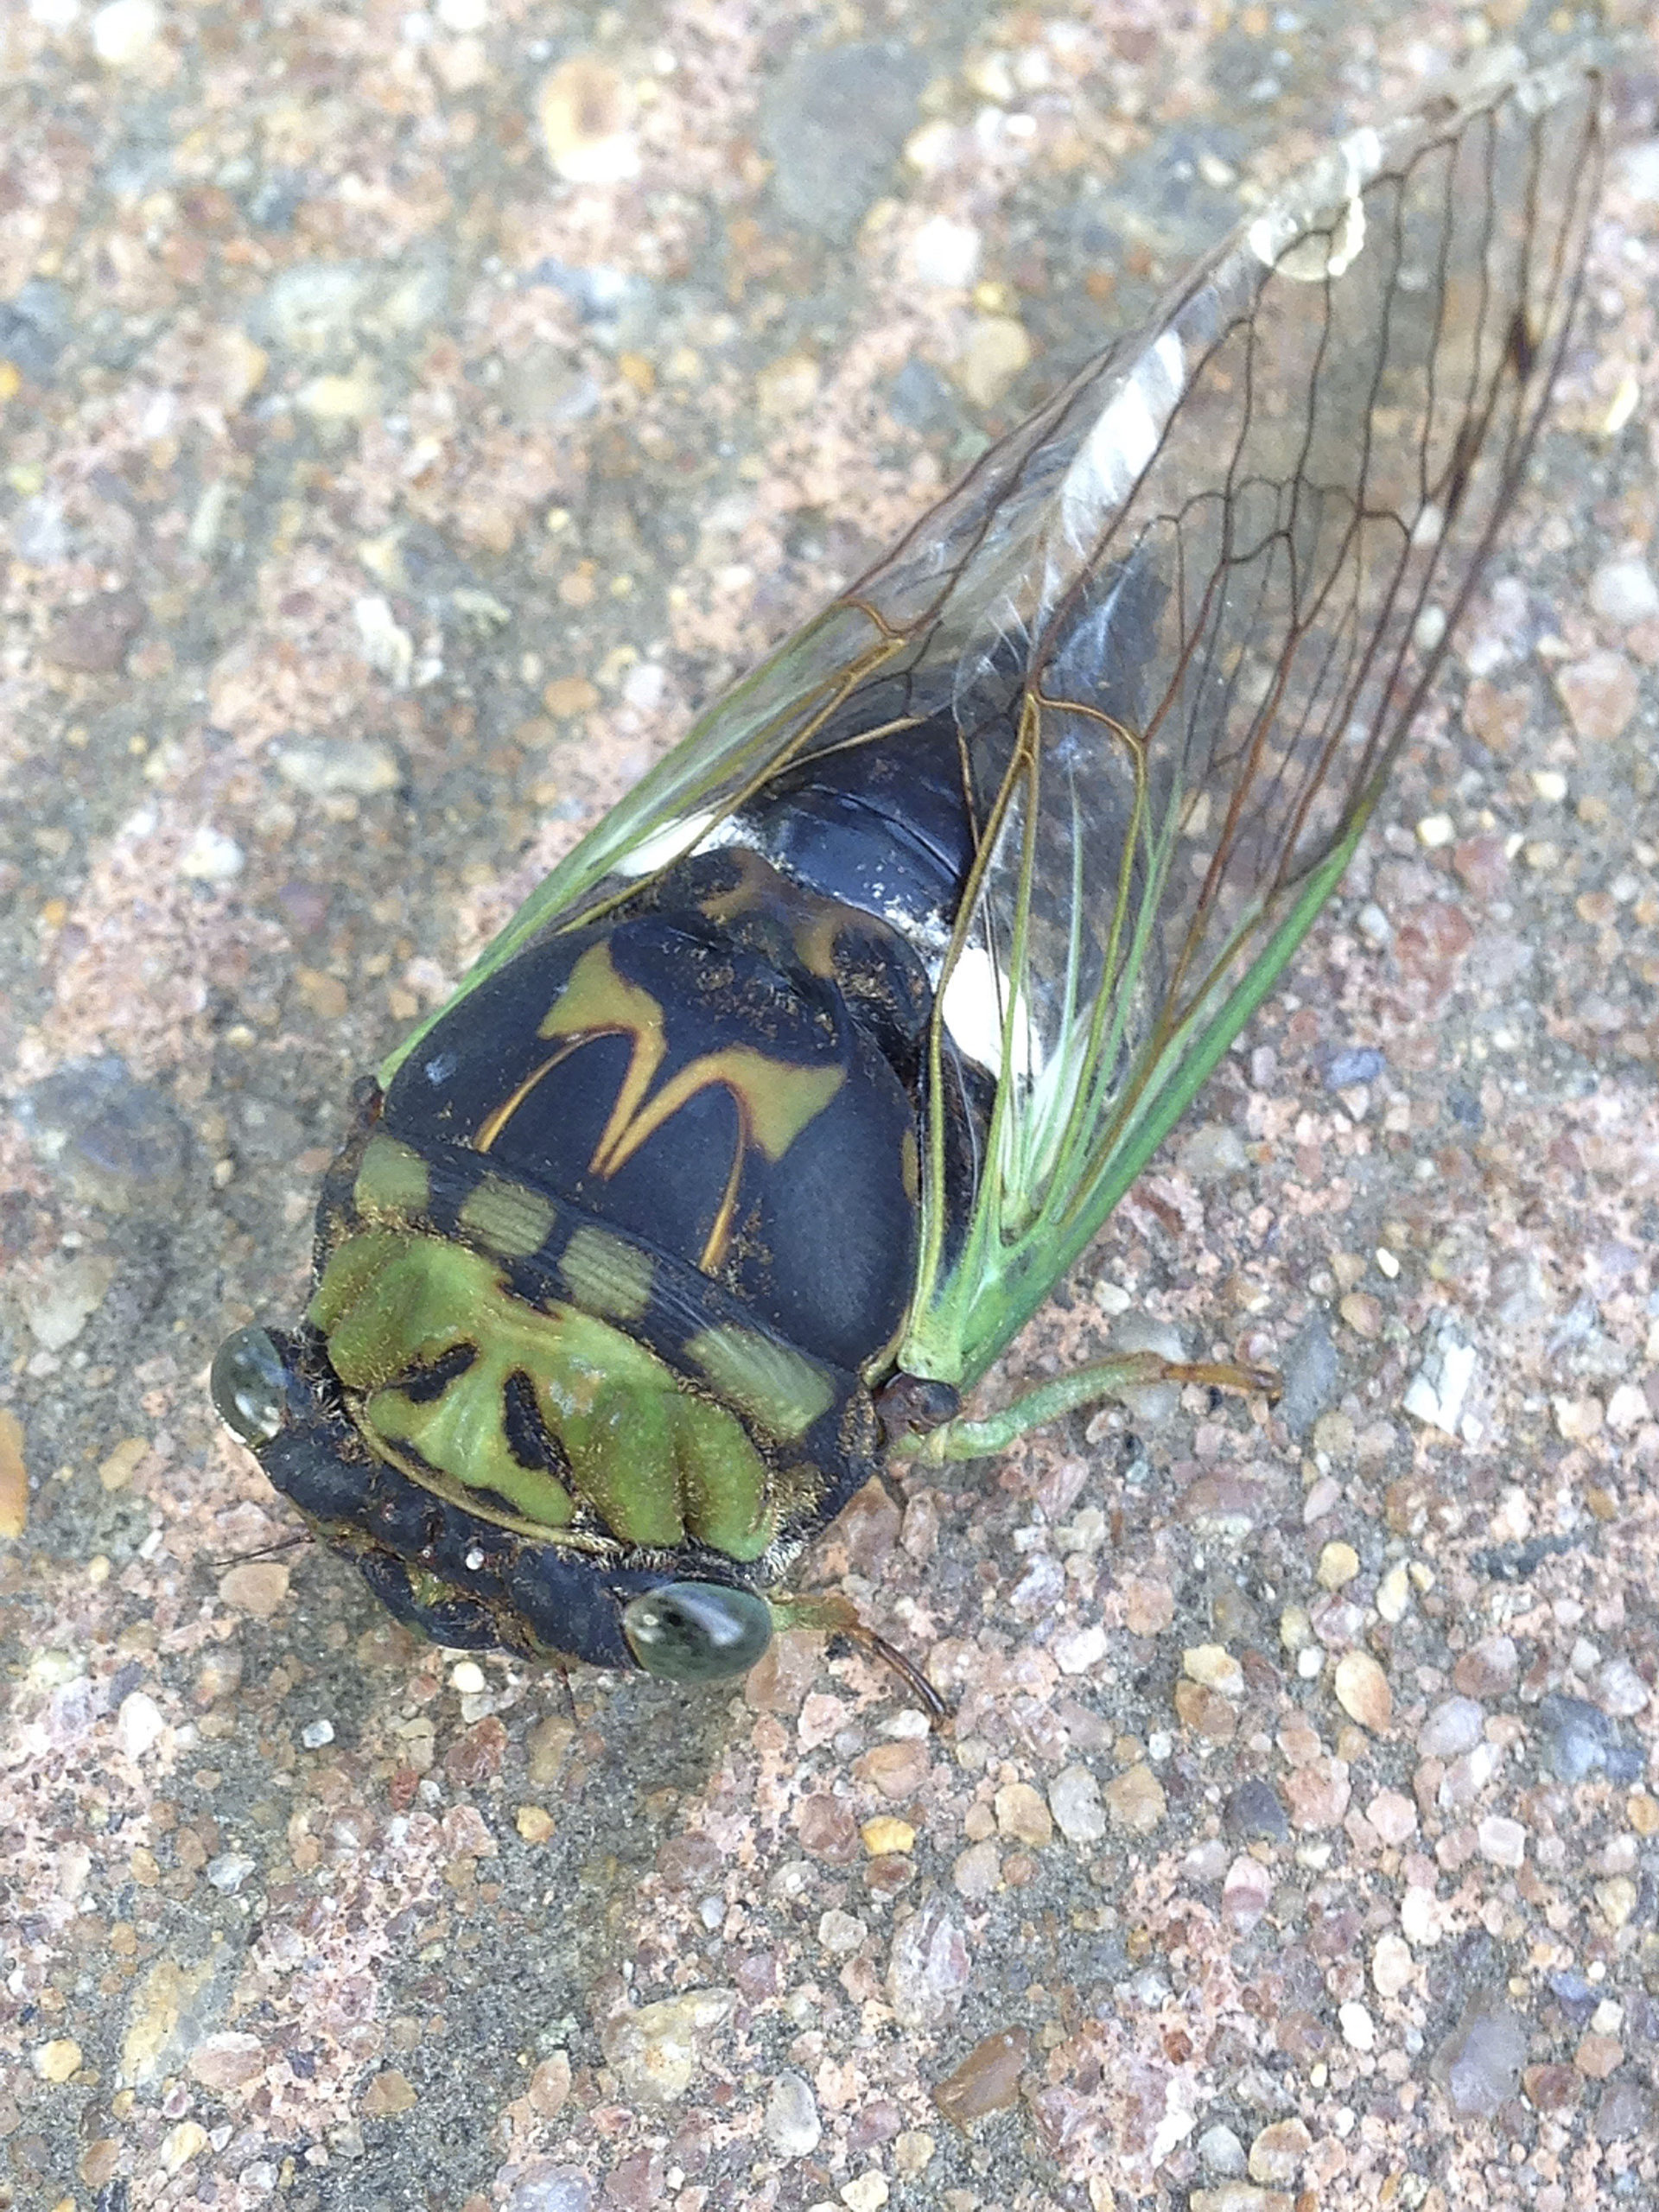 The cicada with blue-green wing veins is an annual or ‘dog-day’ cicada. These have a much shorter life cycle  and emerge later around mid-summer. Most people have heard the buzzing call of the males from high in the trees. They are here on Long Island every year.    DANA SHAW